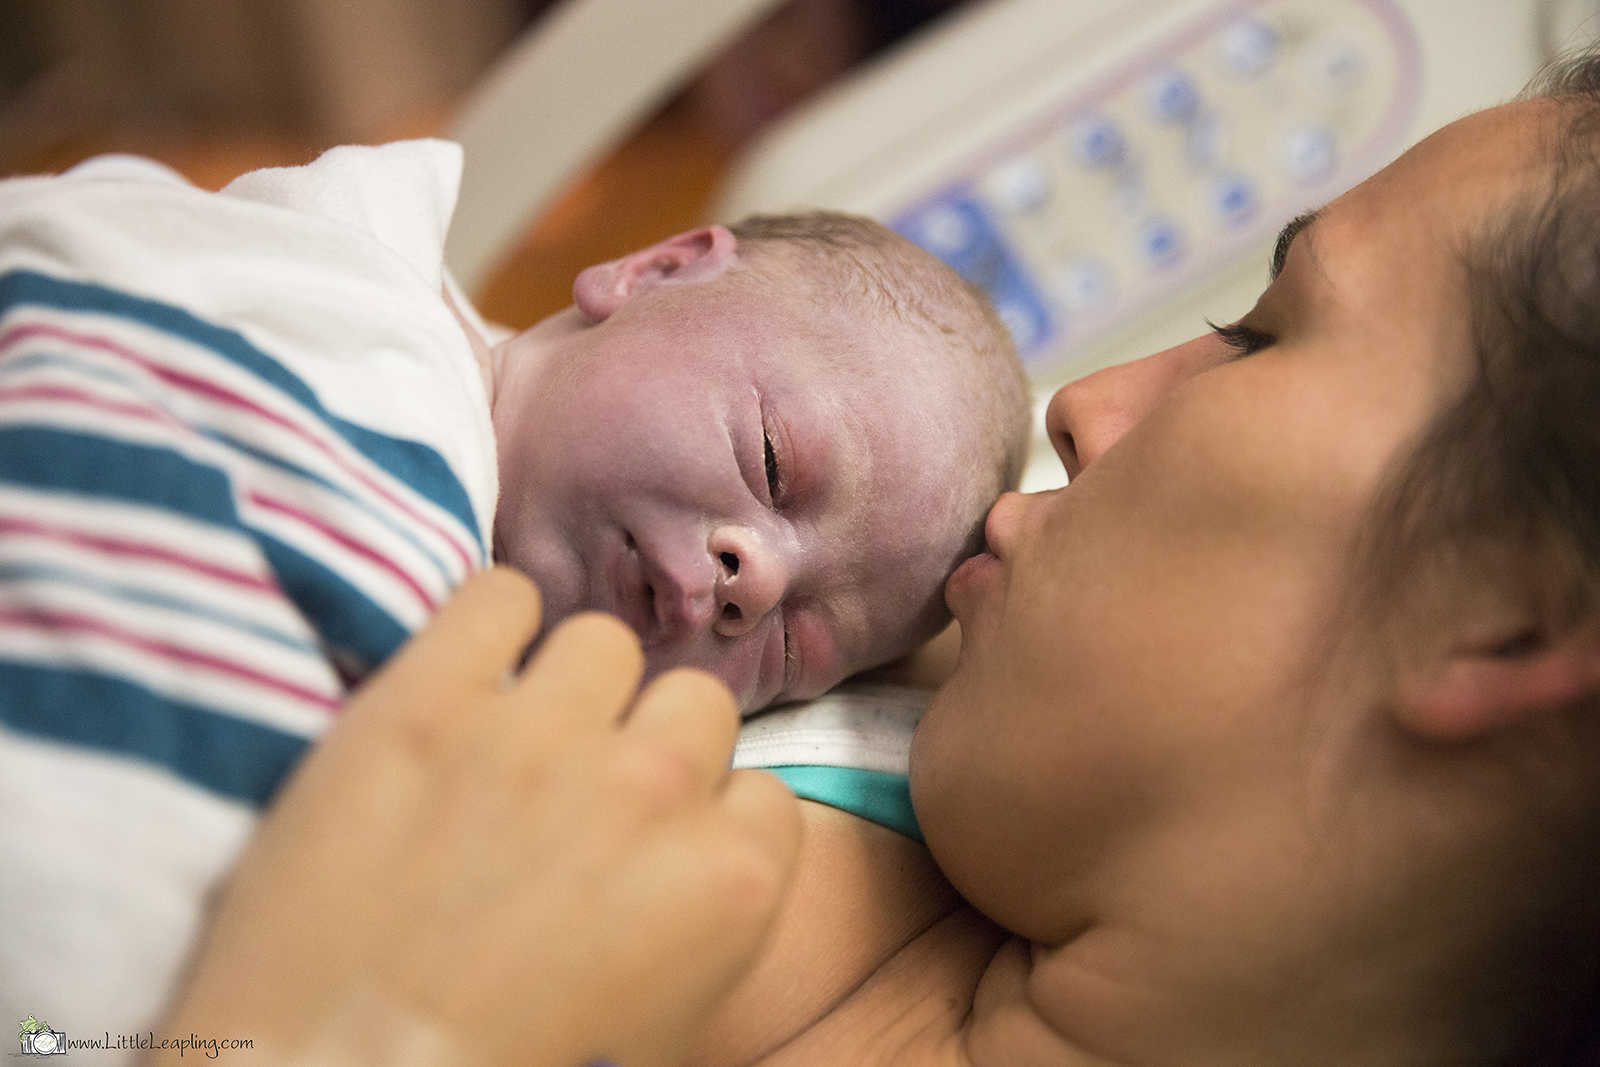 mother gives newborn baby a kiss on the forehead as it lies on her chest